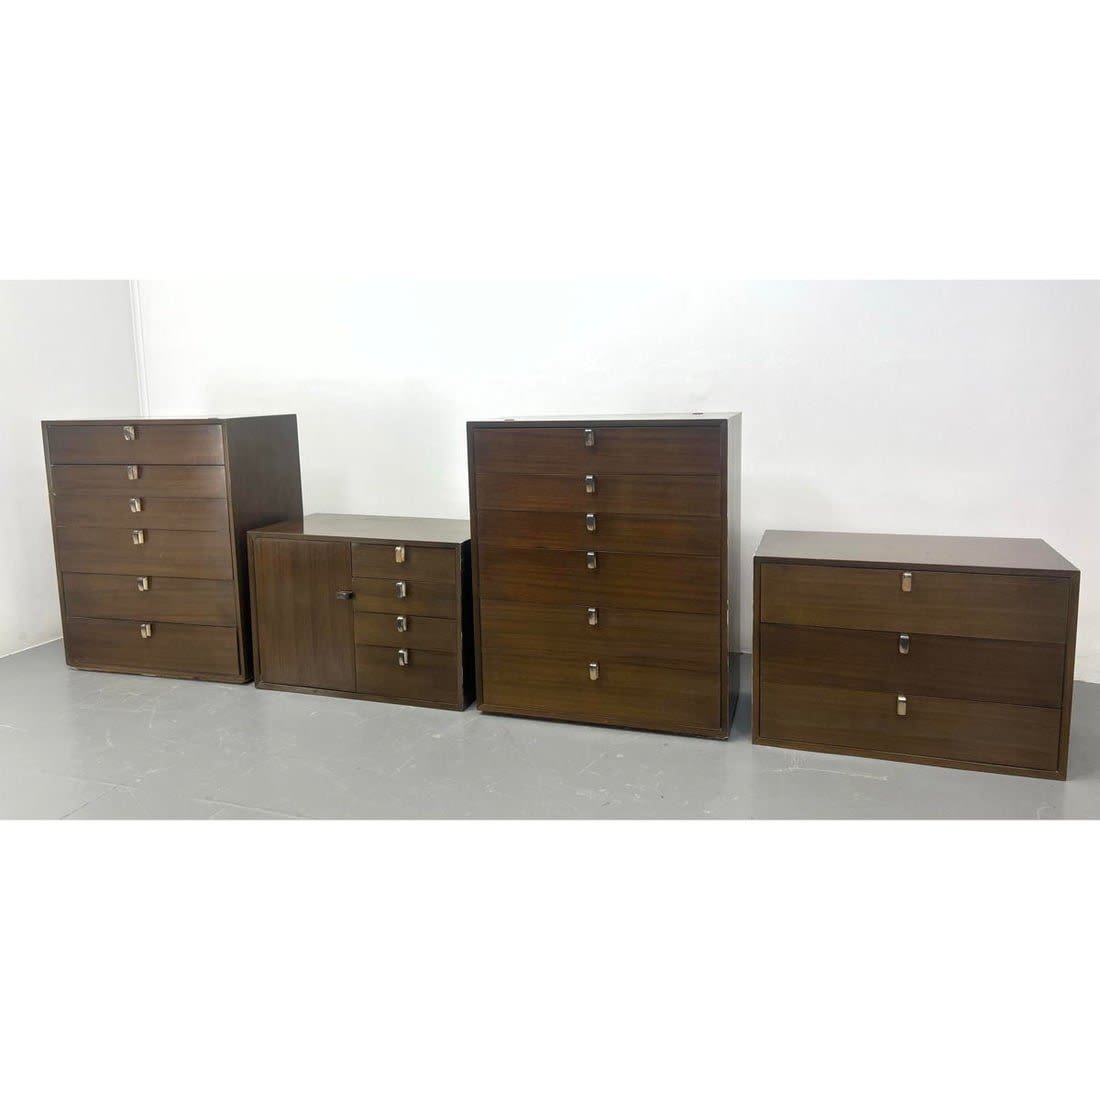 4pc GEORGE NELSON Walnut Cabinets 362a21